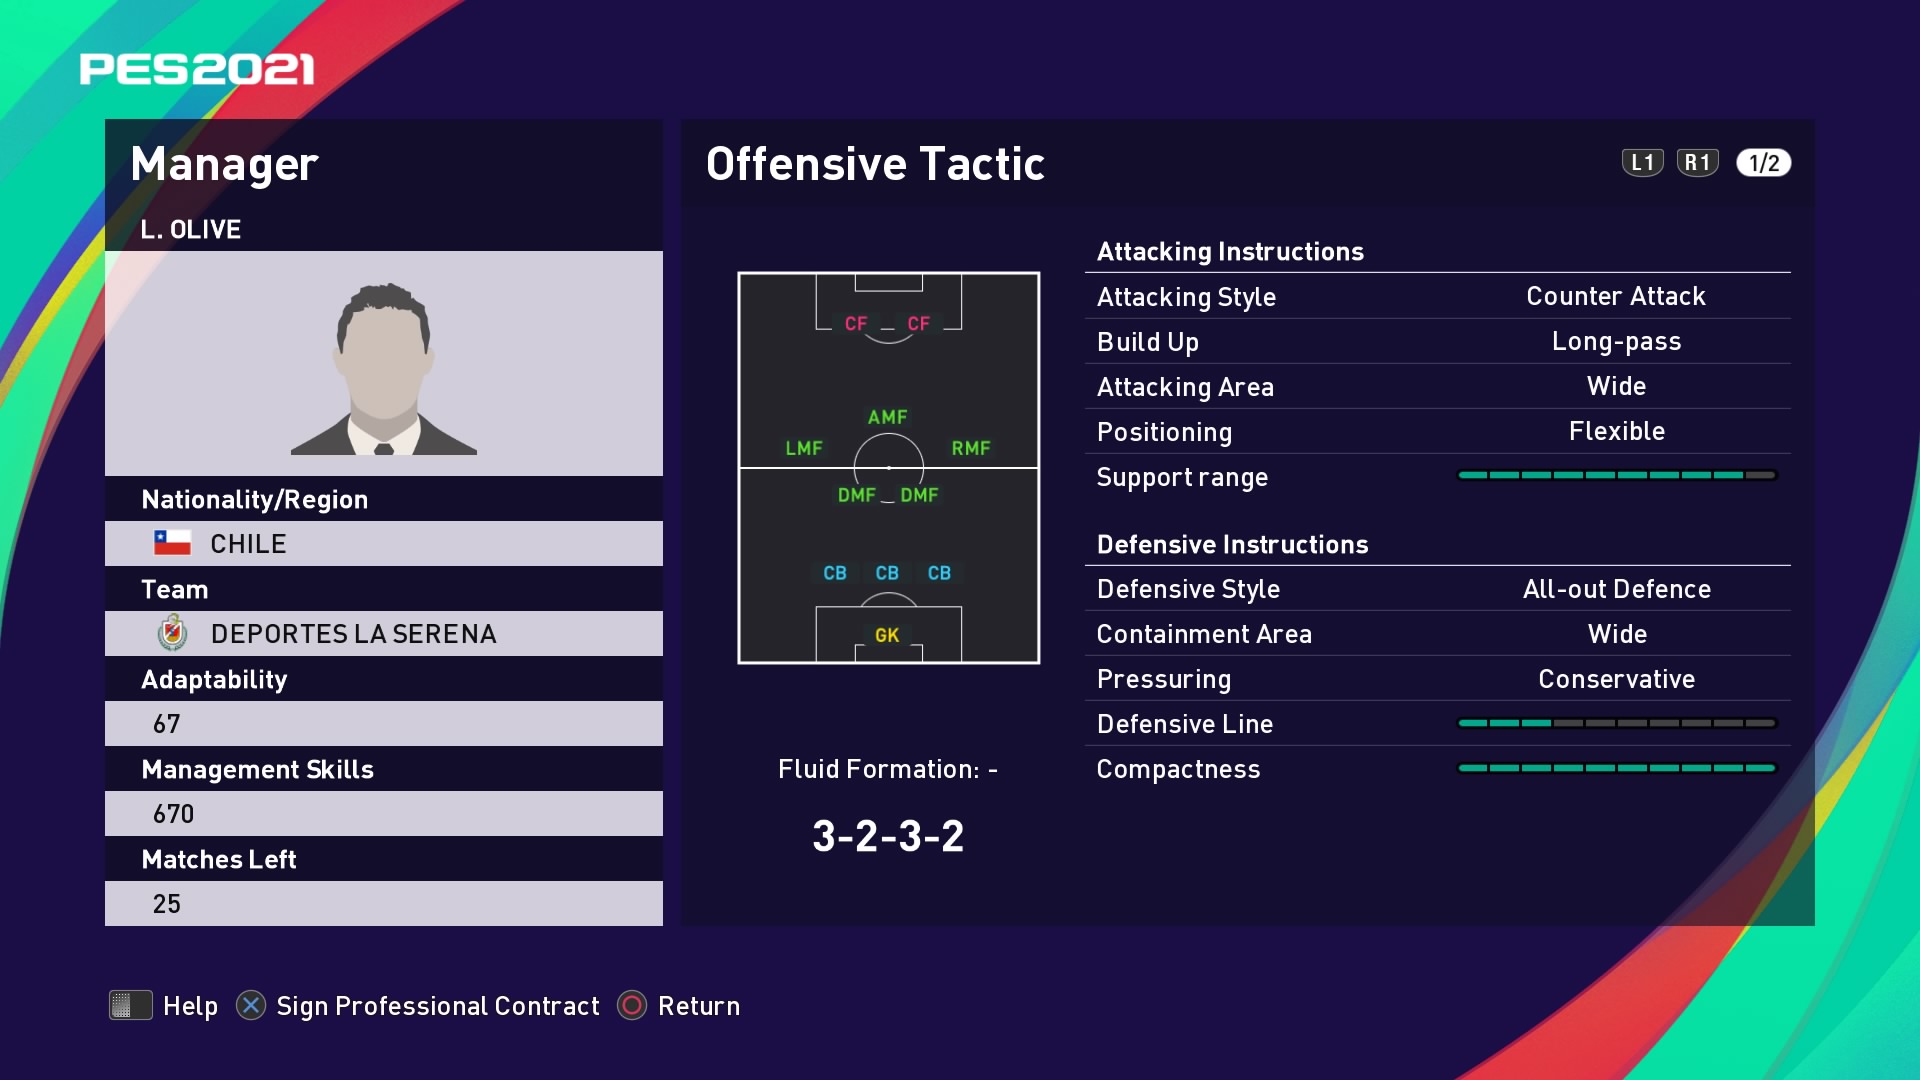 L. Olive (Francisco Bozán) Offensive Tactic in PES 2021 myClub